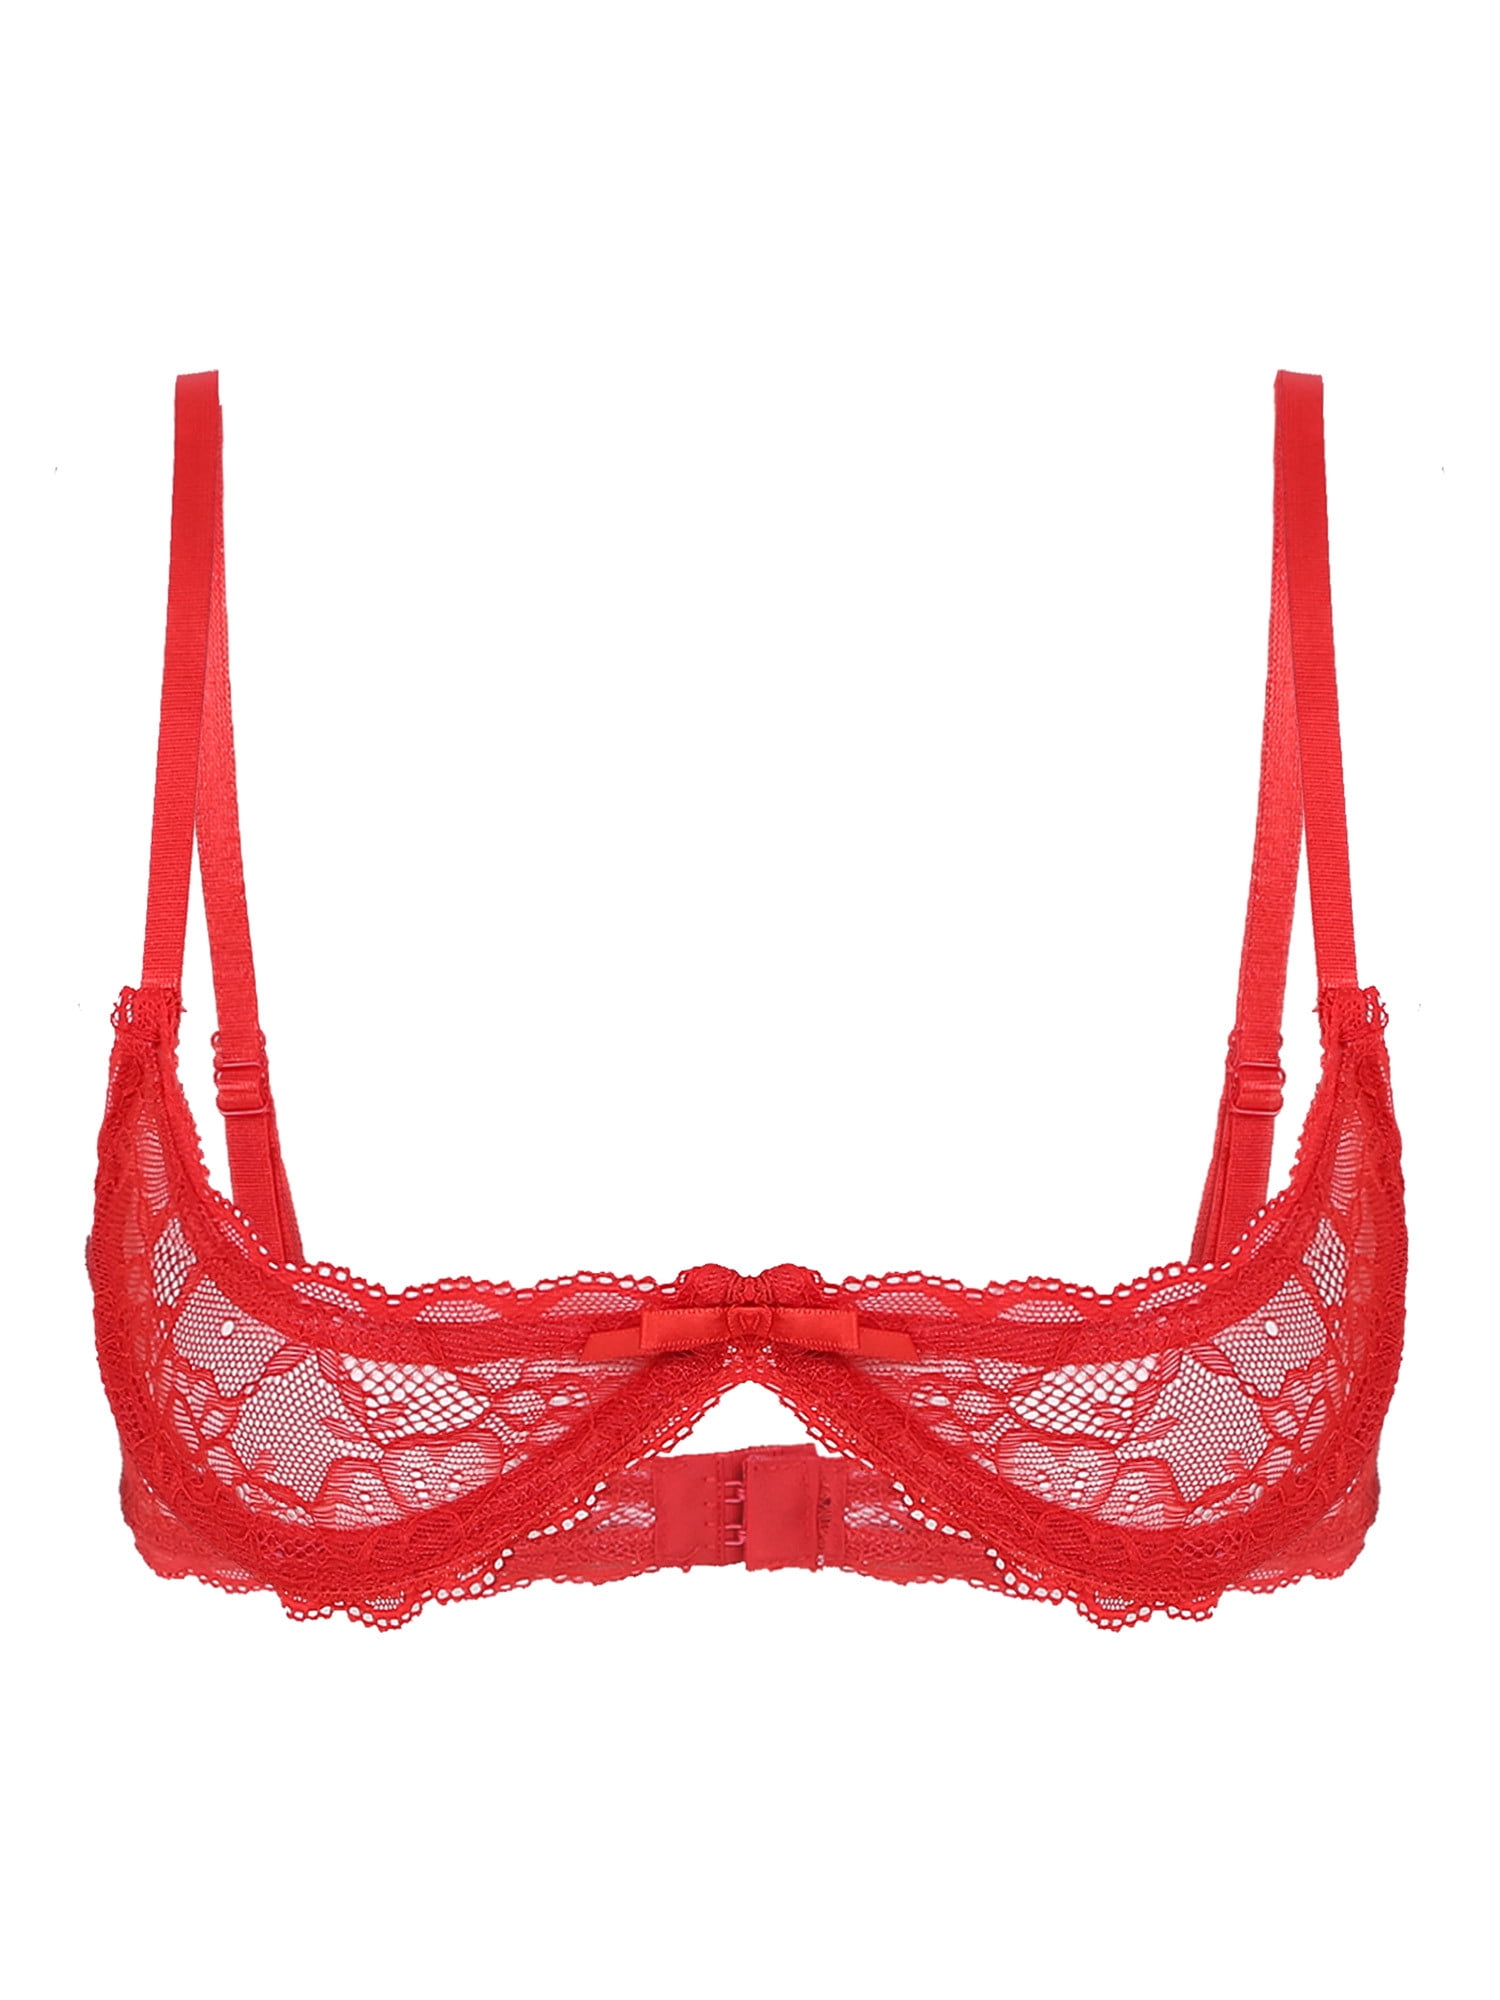 MSemis Women's 1/4 Cup Lace Bra Underwired Unlined Bralette Tops Red 4XL